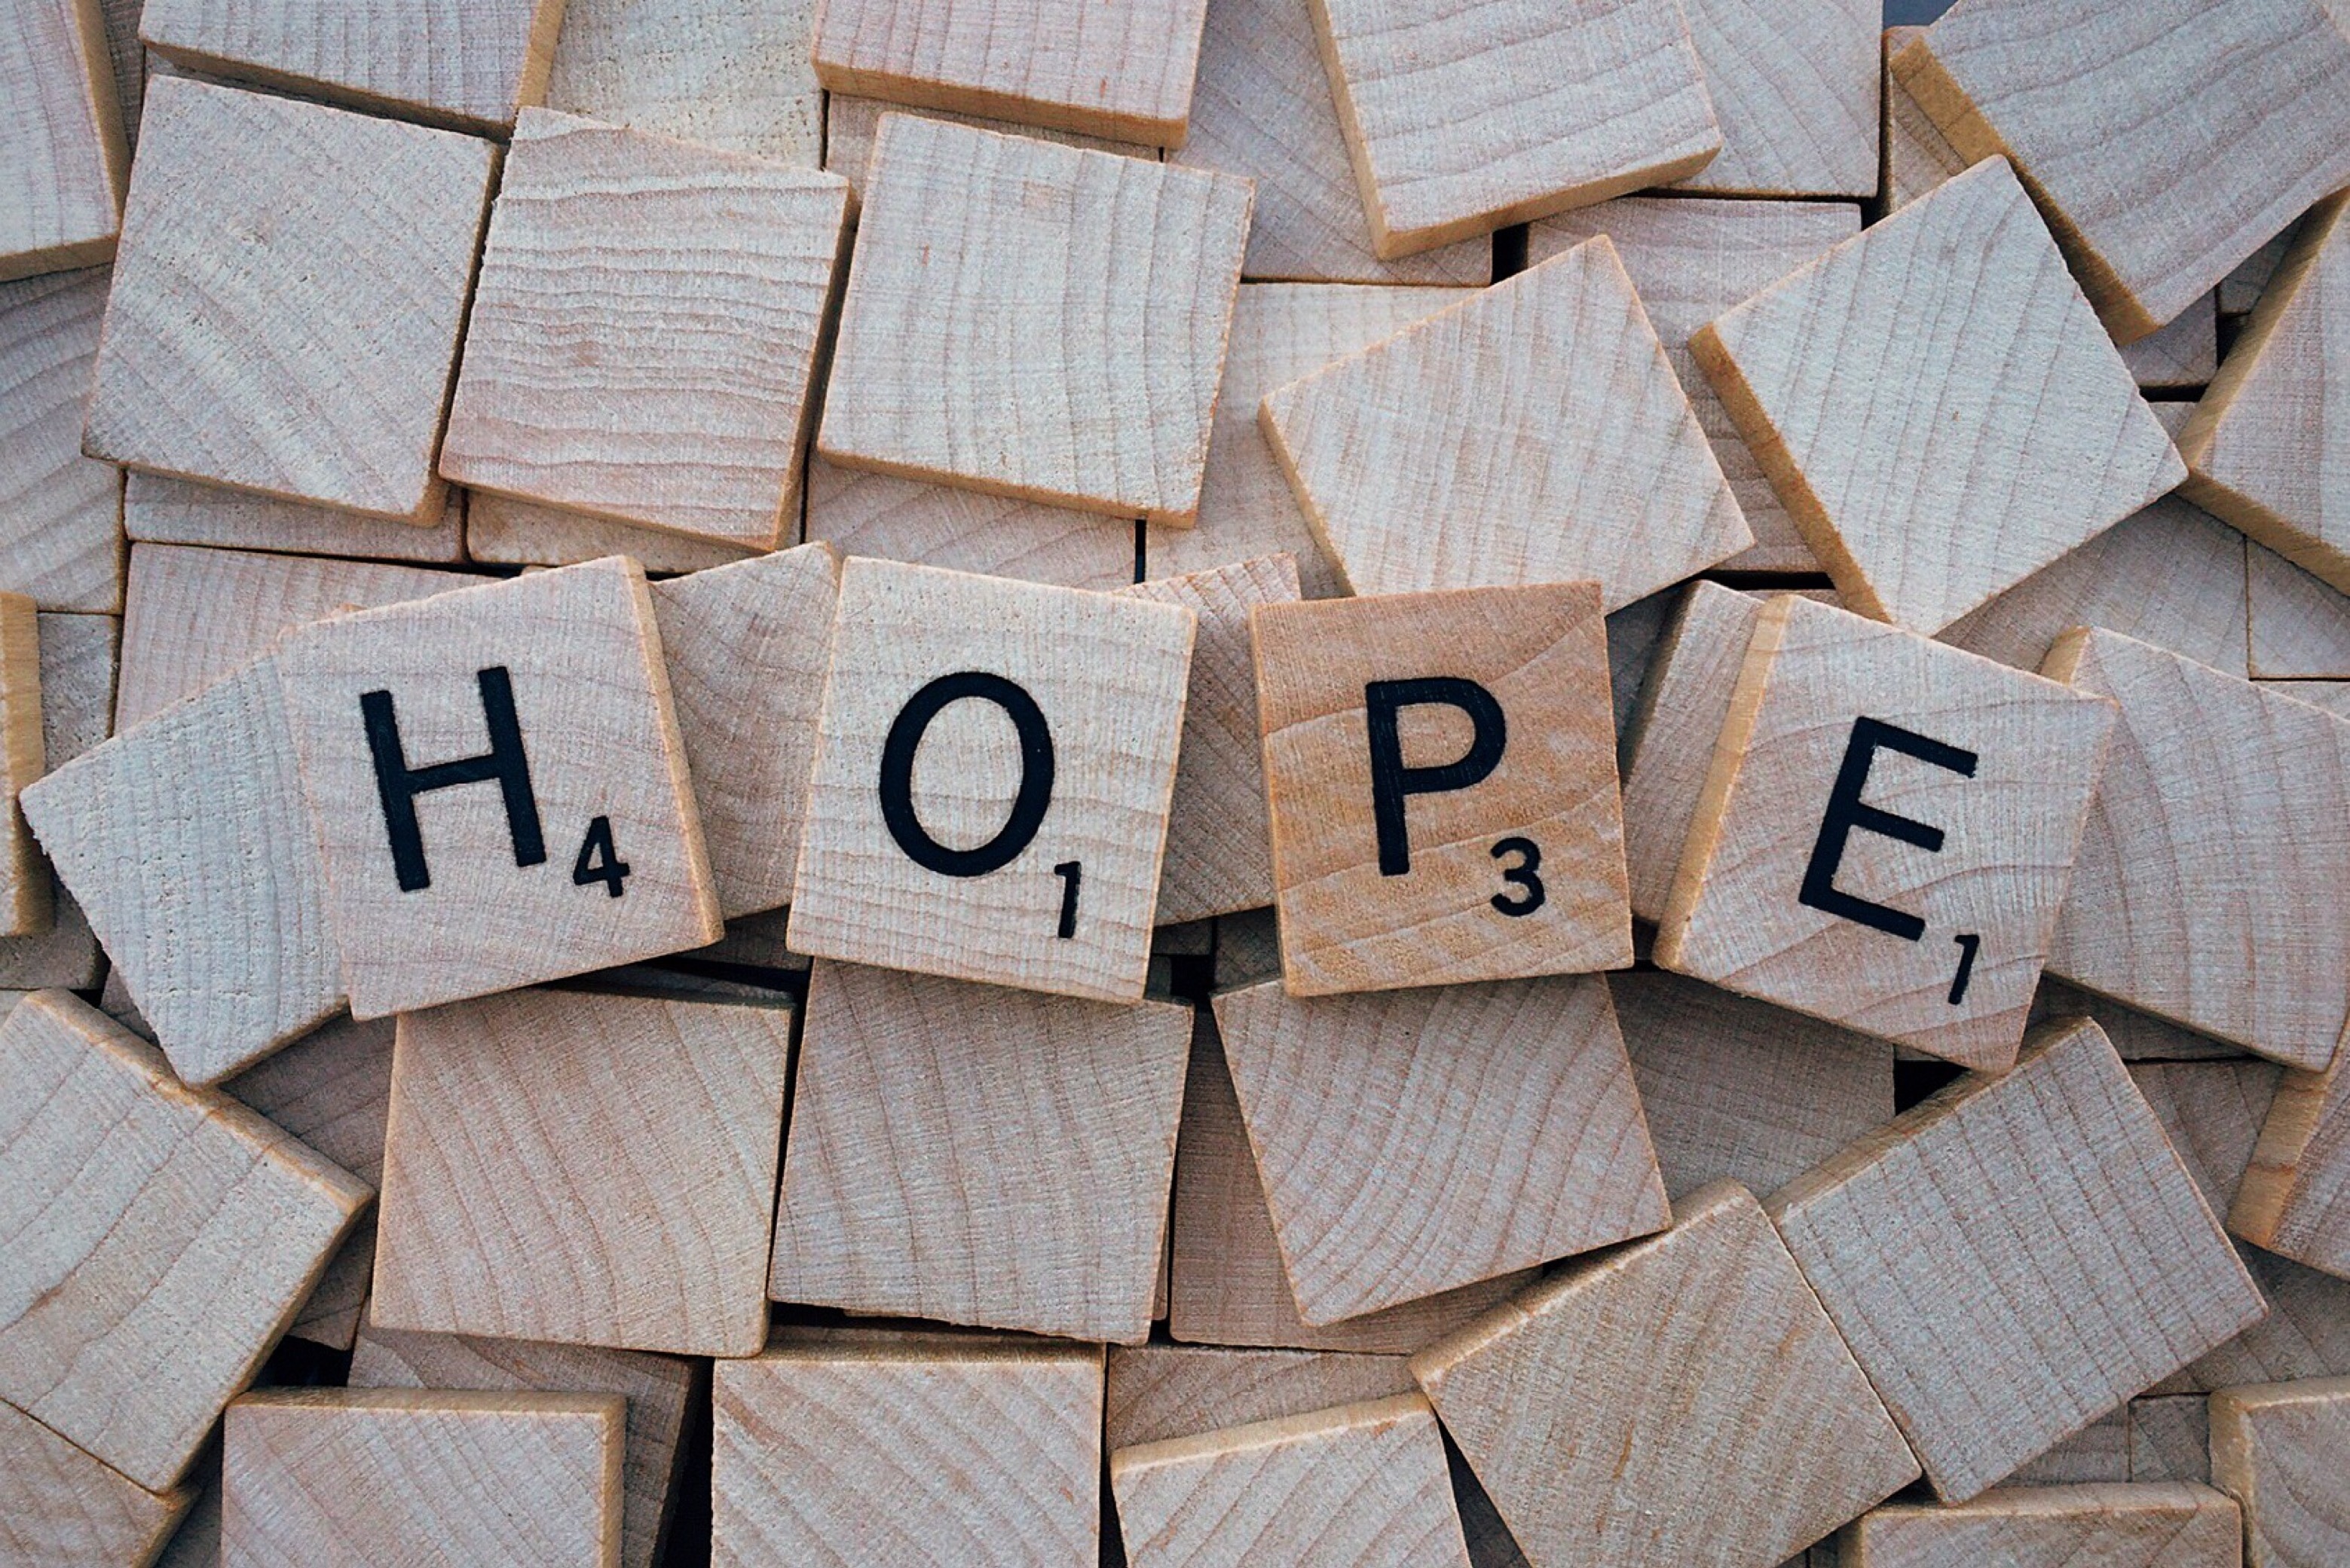 Scrabble: Hope, Wooden tiles that are used in a classic American word game. 3120x2090 HD Wallpaper.